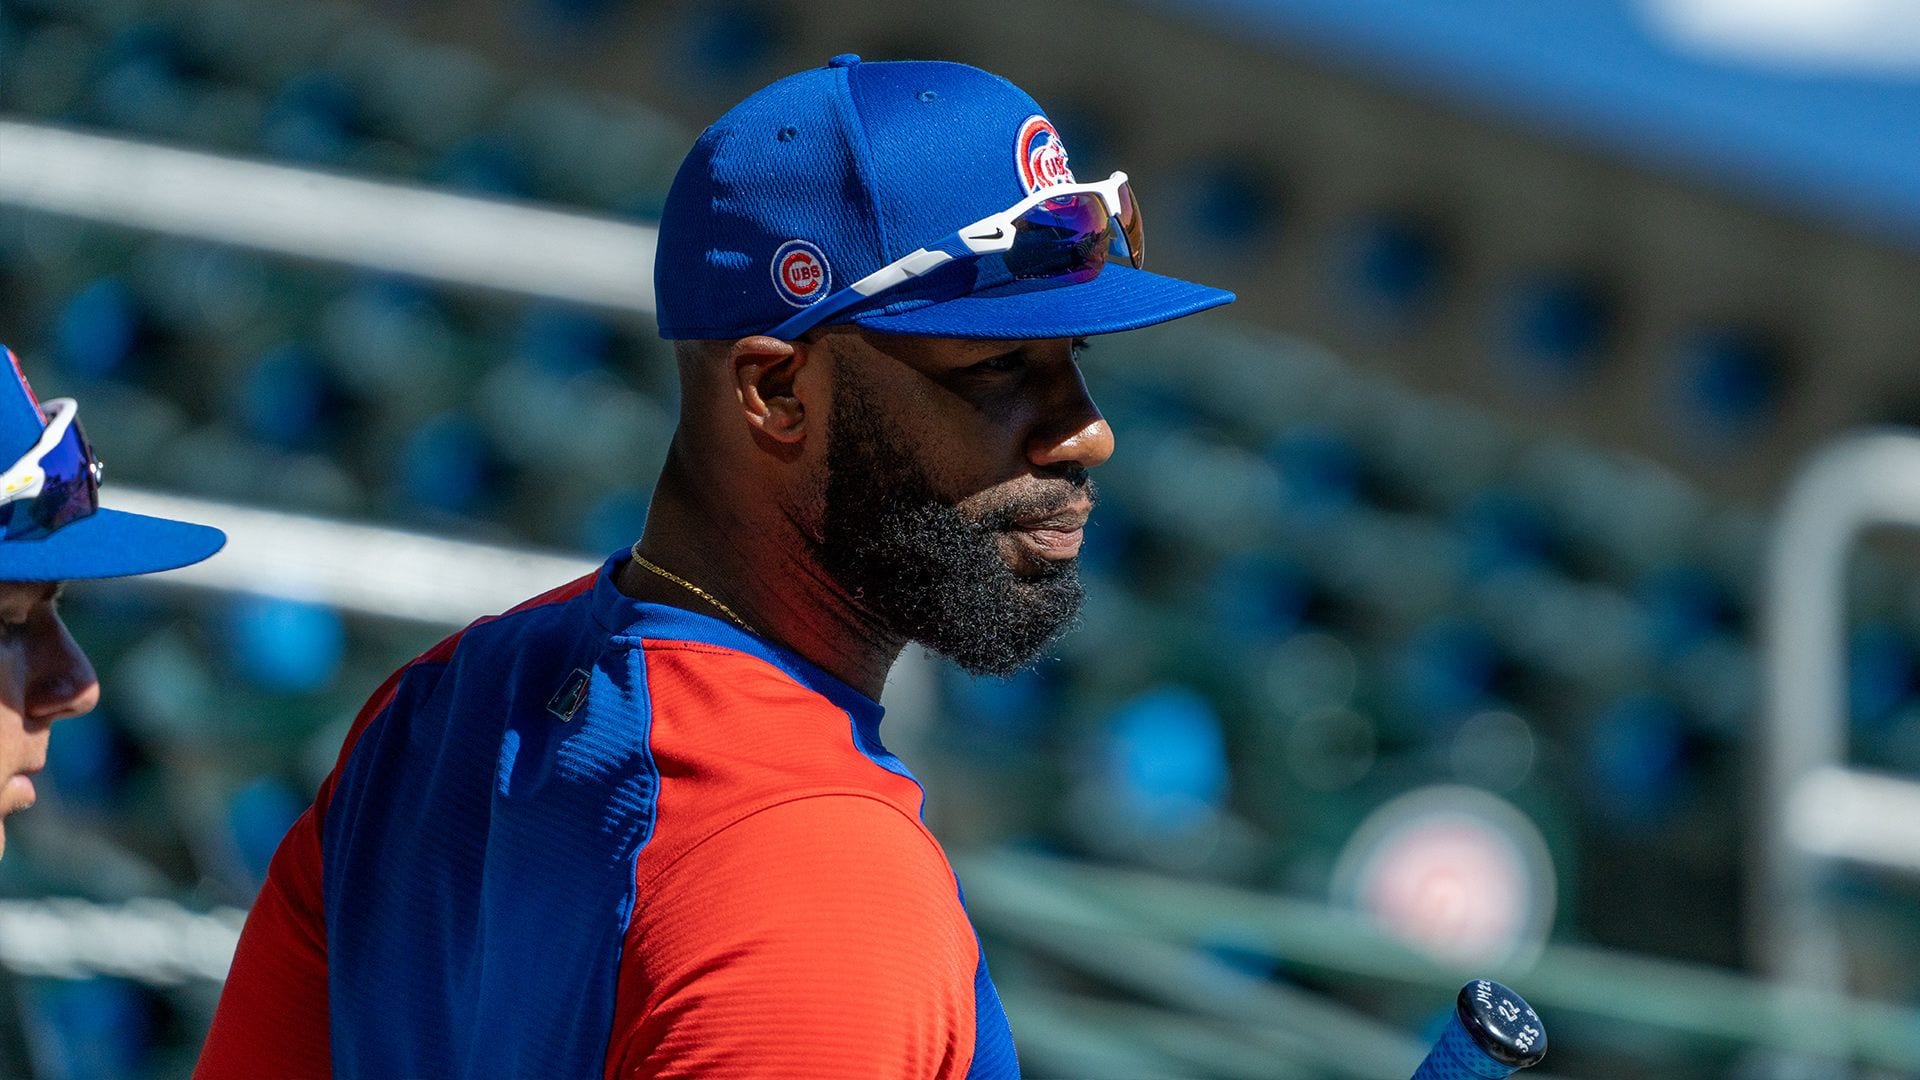 This Is for Chicago by Jason Heyward